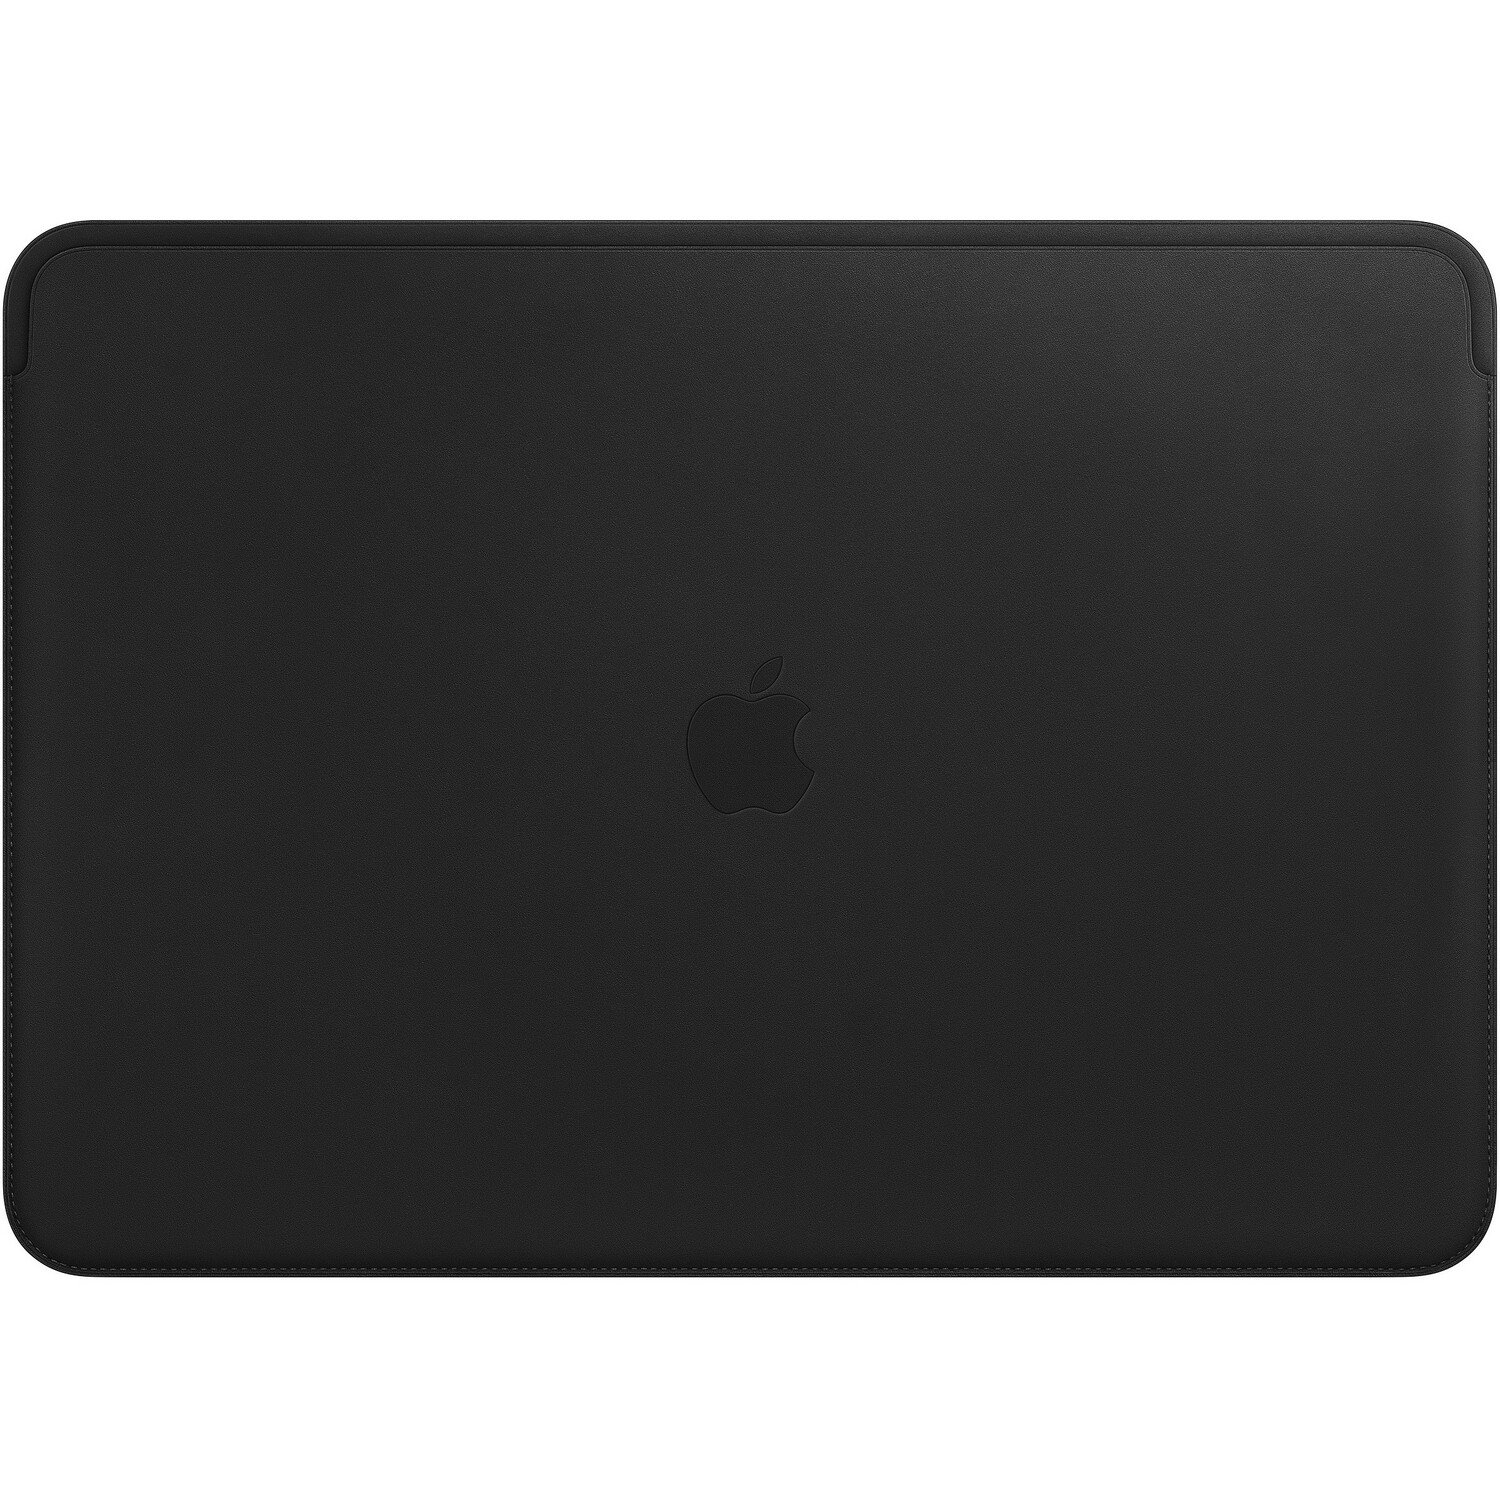 Apple Leather Sleeve Carrying Case (Sleeve) for 33 cm (13") MacBook Pro - Black